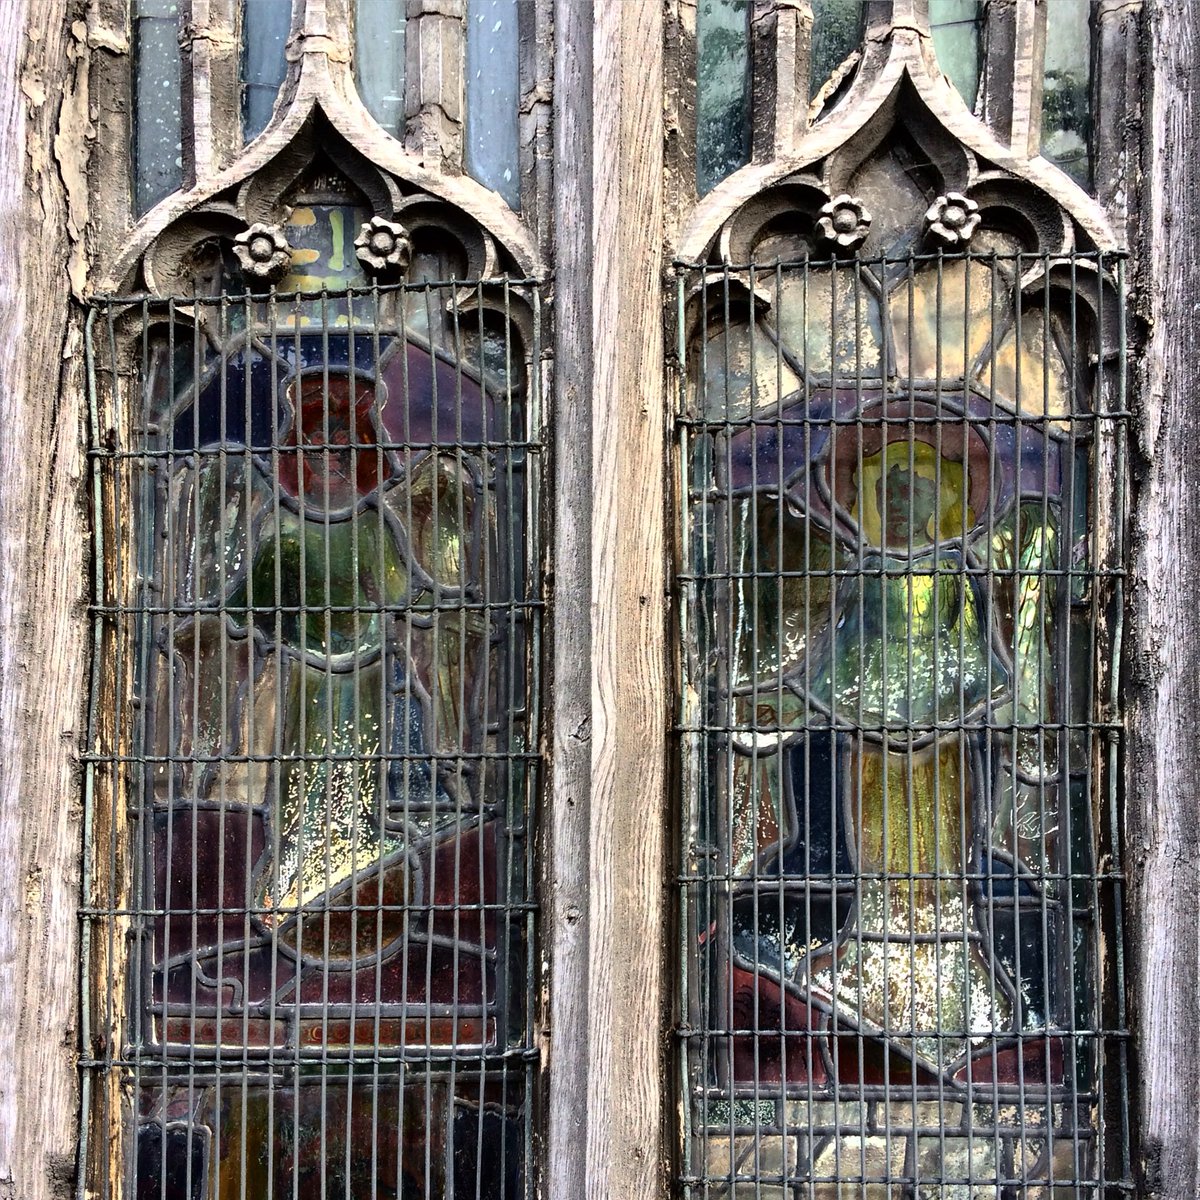 The outside of #stainedglass angels in C15th Porch House, Potterne #Wiltshire #angelology #medievalglass